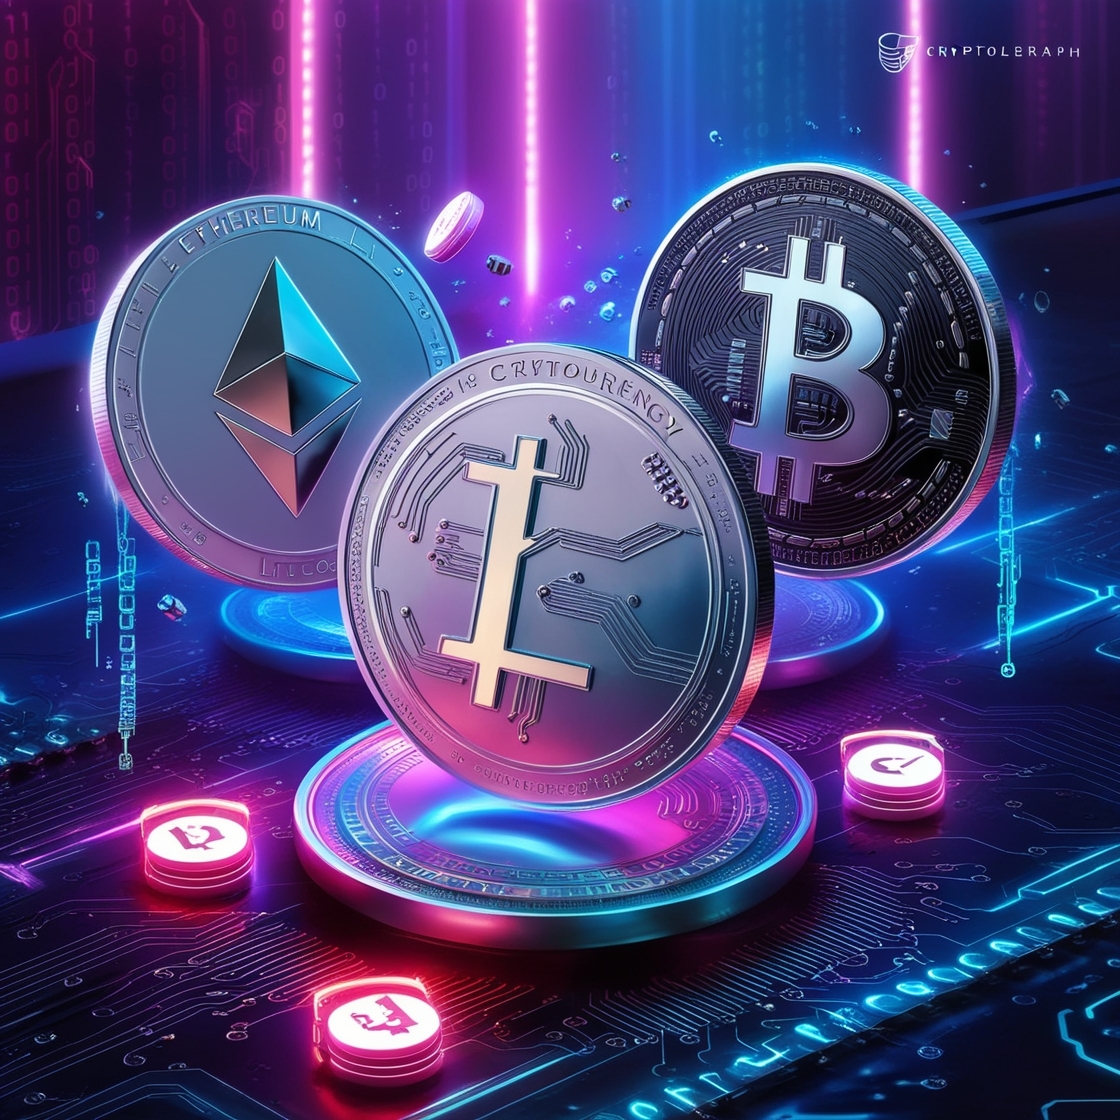 A futuristic digital illustration of cryptocurrency coins, rendered in a mix of 3D modeling and digital painting, depicting popular altcoins such as Ethereum, Litecoin, and Dogecoin, floating amidst a neon-lit, Circuit-board inspired background, with sleek, metallic textures and faint binary code patterns. The aesthetics evoke a sense of high-tech futurism and dynamic energy, with a palette of deep blues, purples, and silvers, illuminated by bright neon accents. Additional details include subtle animations of moving code lines and tiny robotic components surrounding the coins.